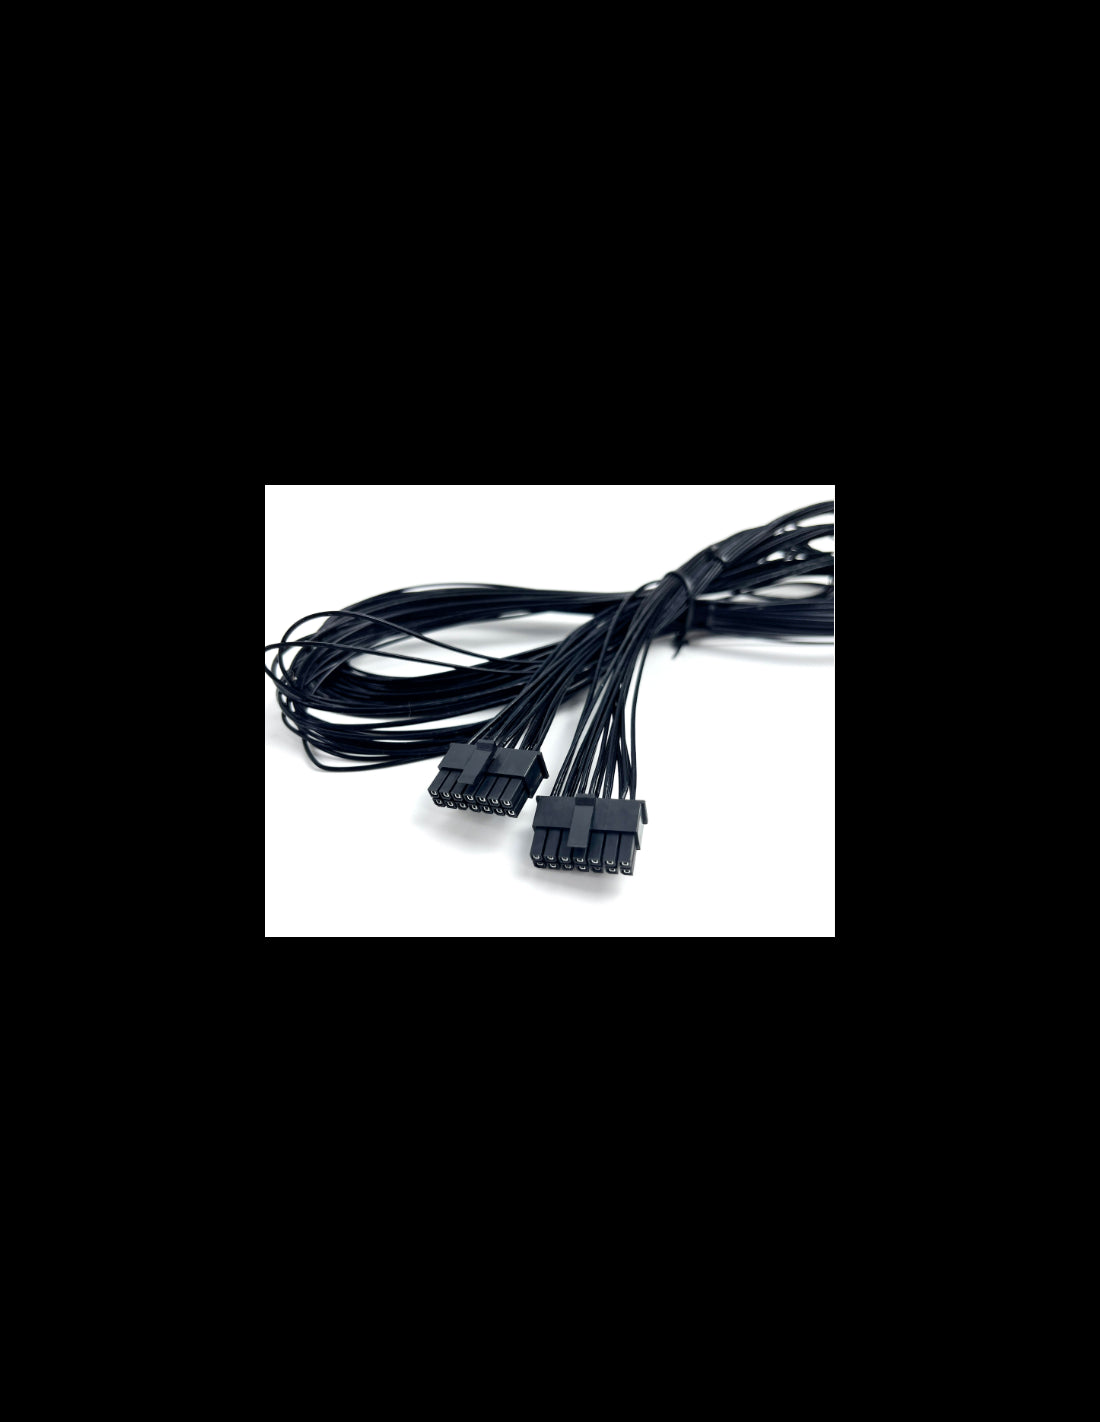 LDO Toolhead Loom Cable for LDO Voron 2.4 and Voron Trident Kits